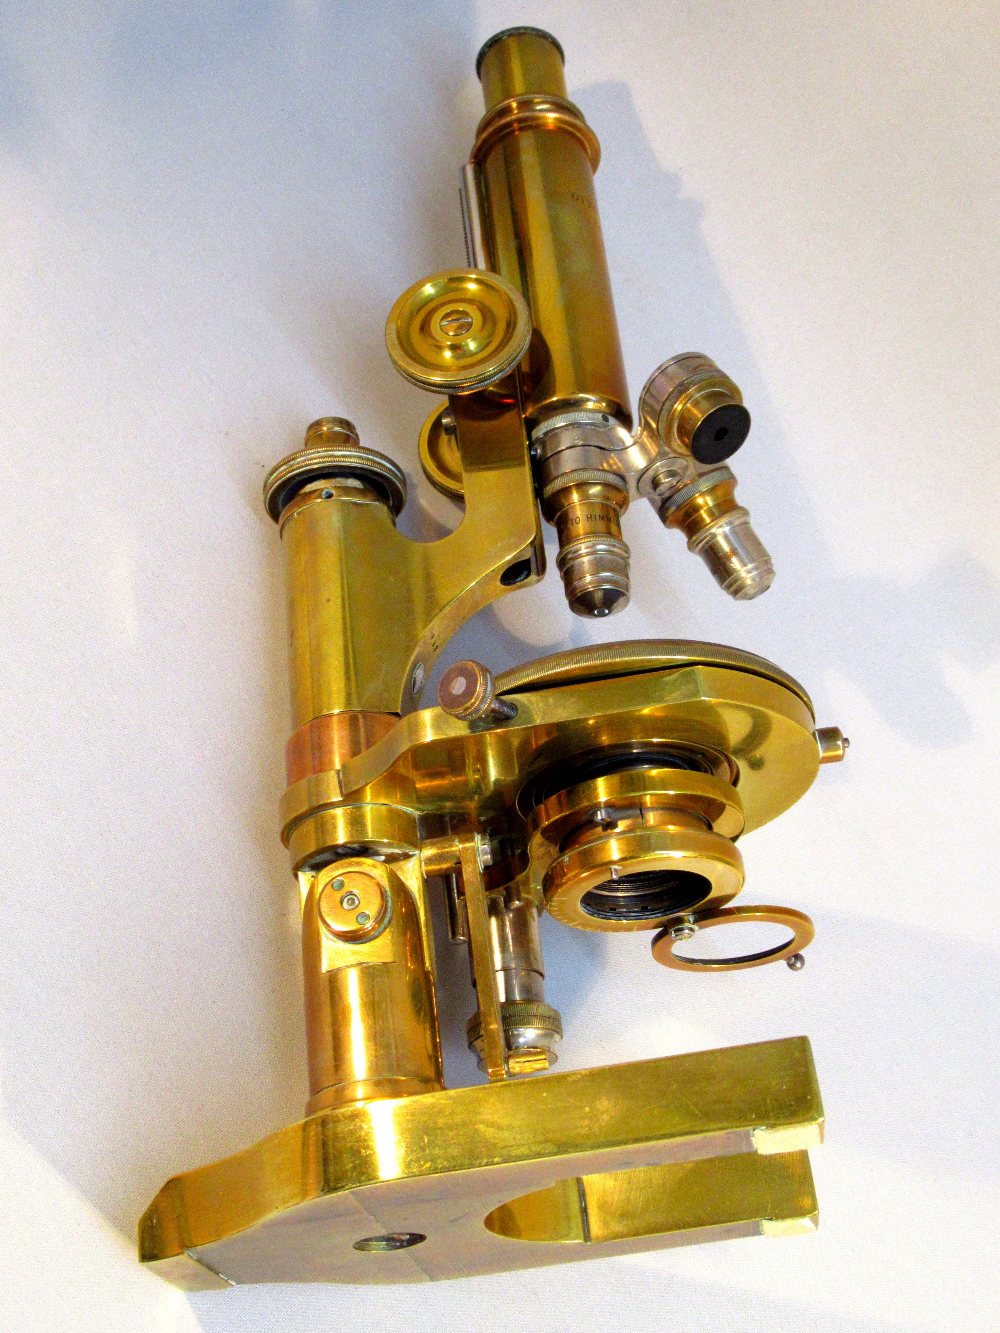 A LATE C19th BRASS MICROSCOPE BY OTTO HIMMLER. BERLIN N.14160 LACQUERED BRASS, HORSE SHOE FOOT, - Image 7 of 10